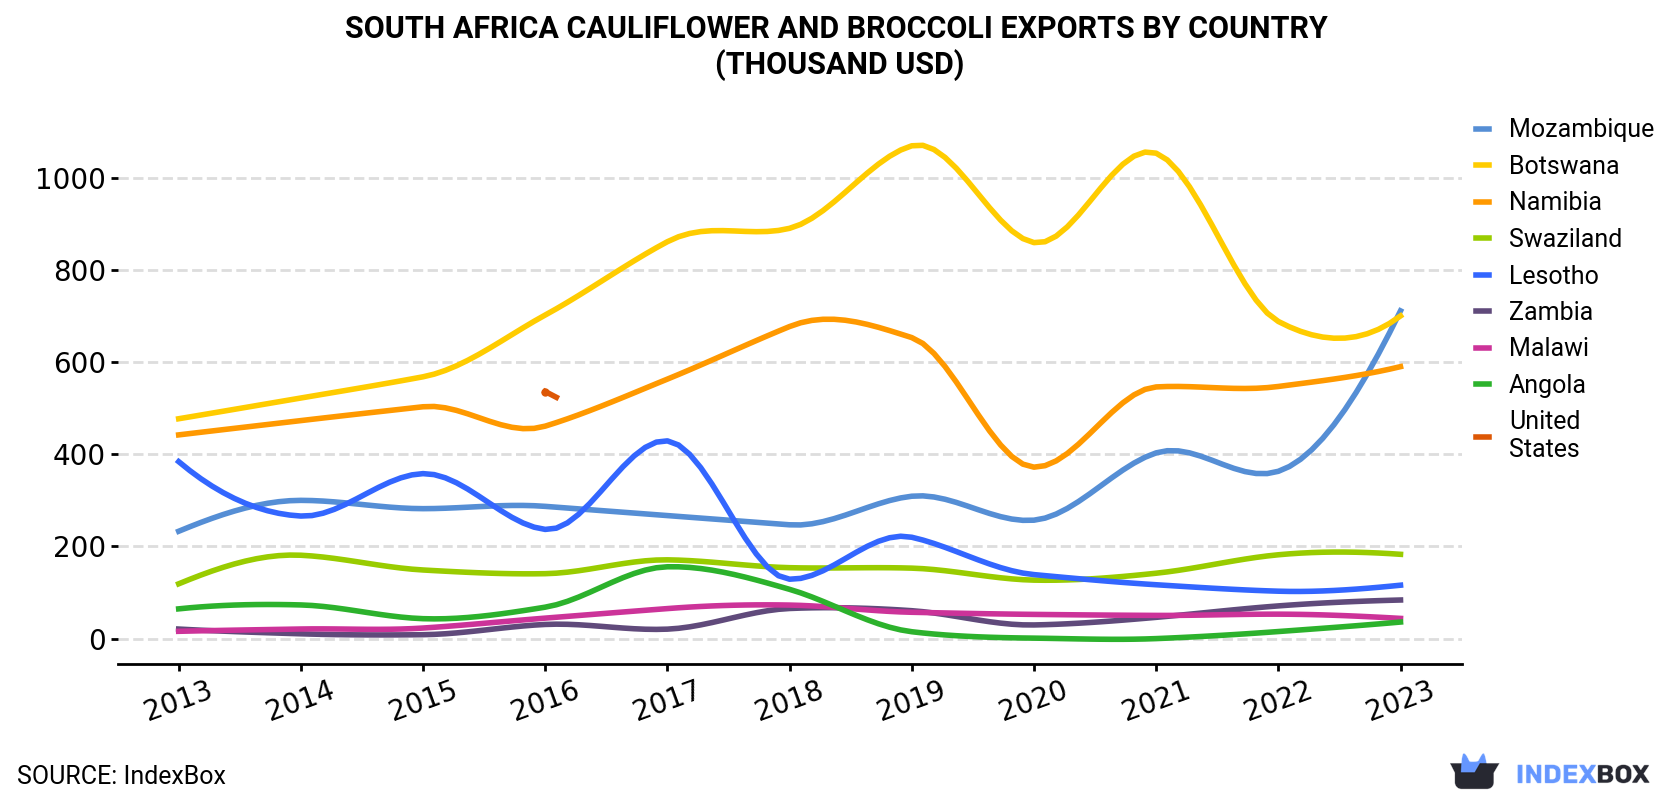 South Africa Cauliflower And Broccoli Exports By Country (Thousand USD)